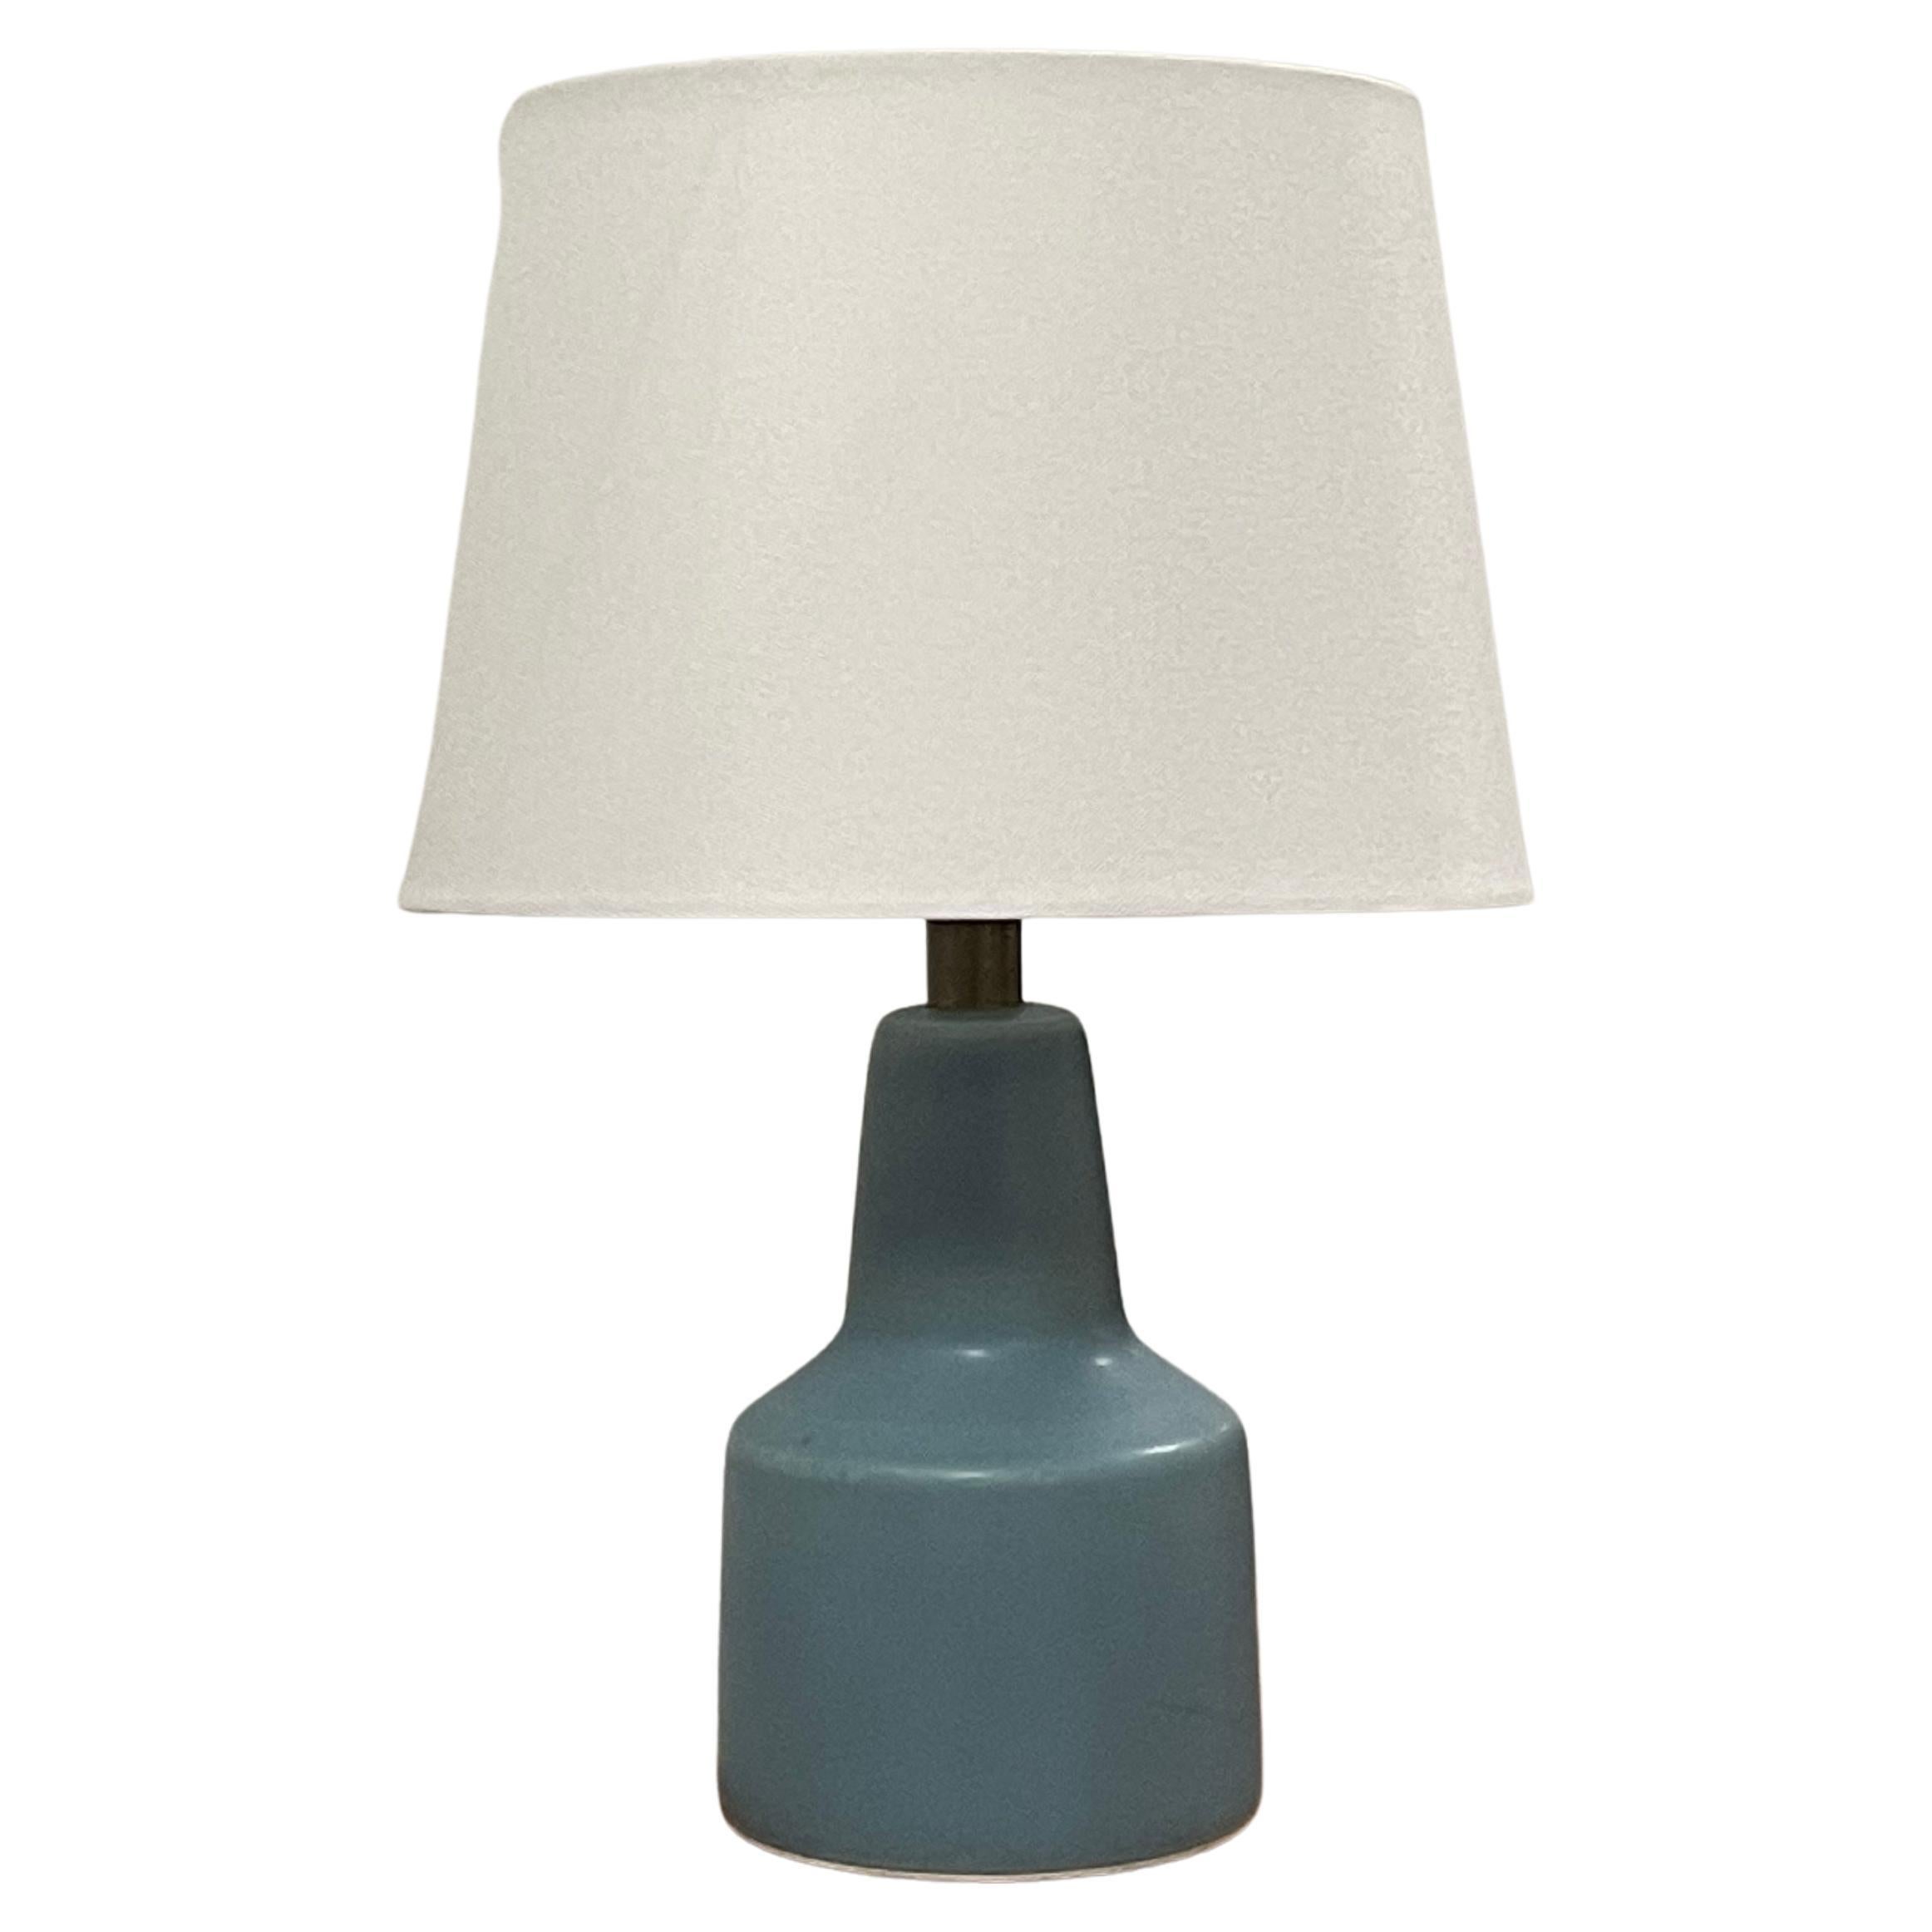 Lotte and Gunnar Bostlund Table Lamp in Robin’s Egg Blue Ceramic For Sale